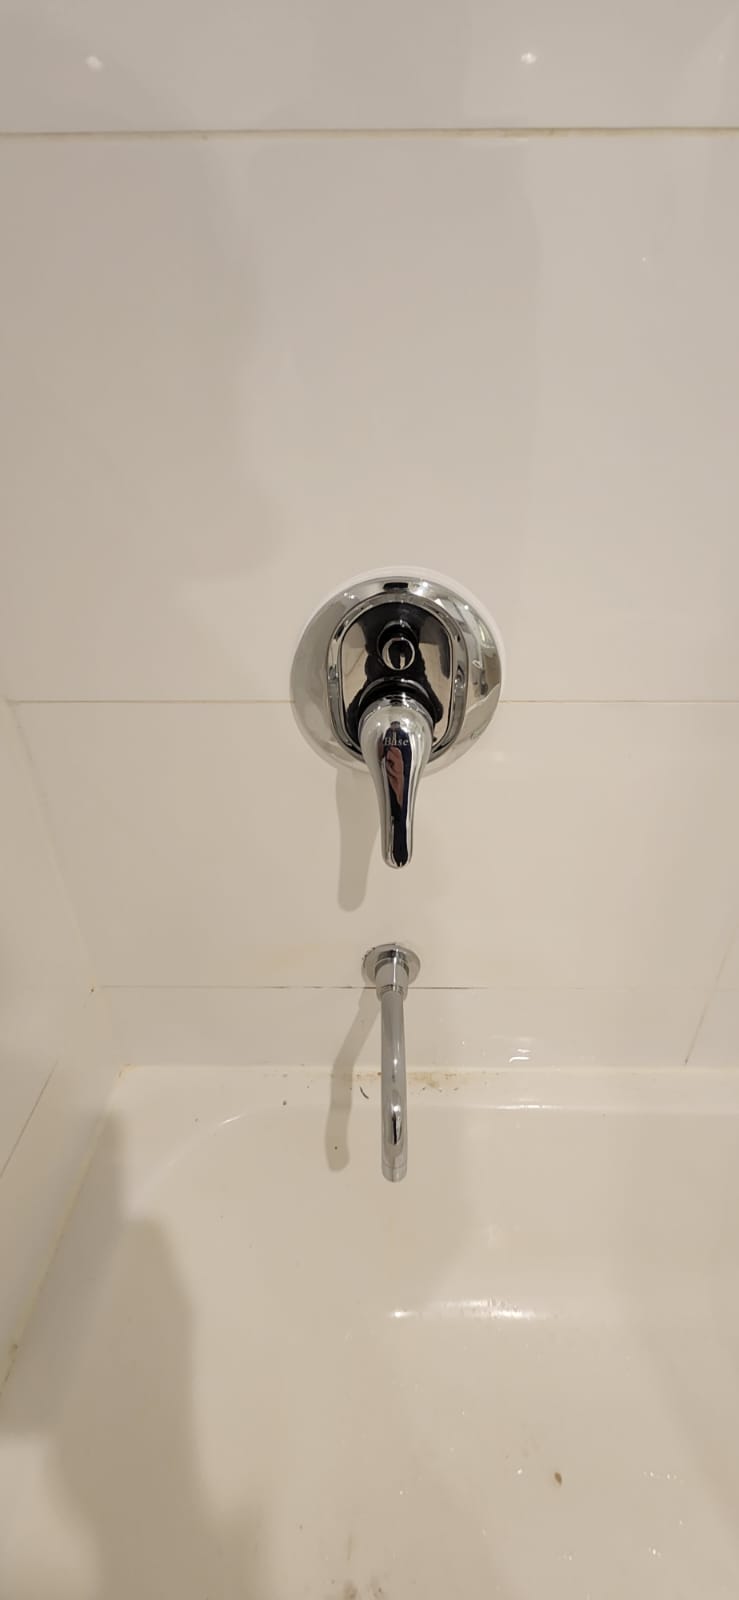 Repair and Install New taps